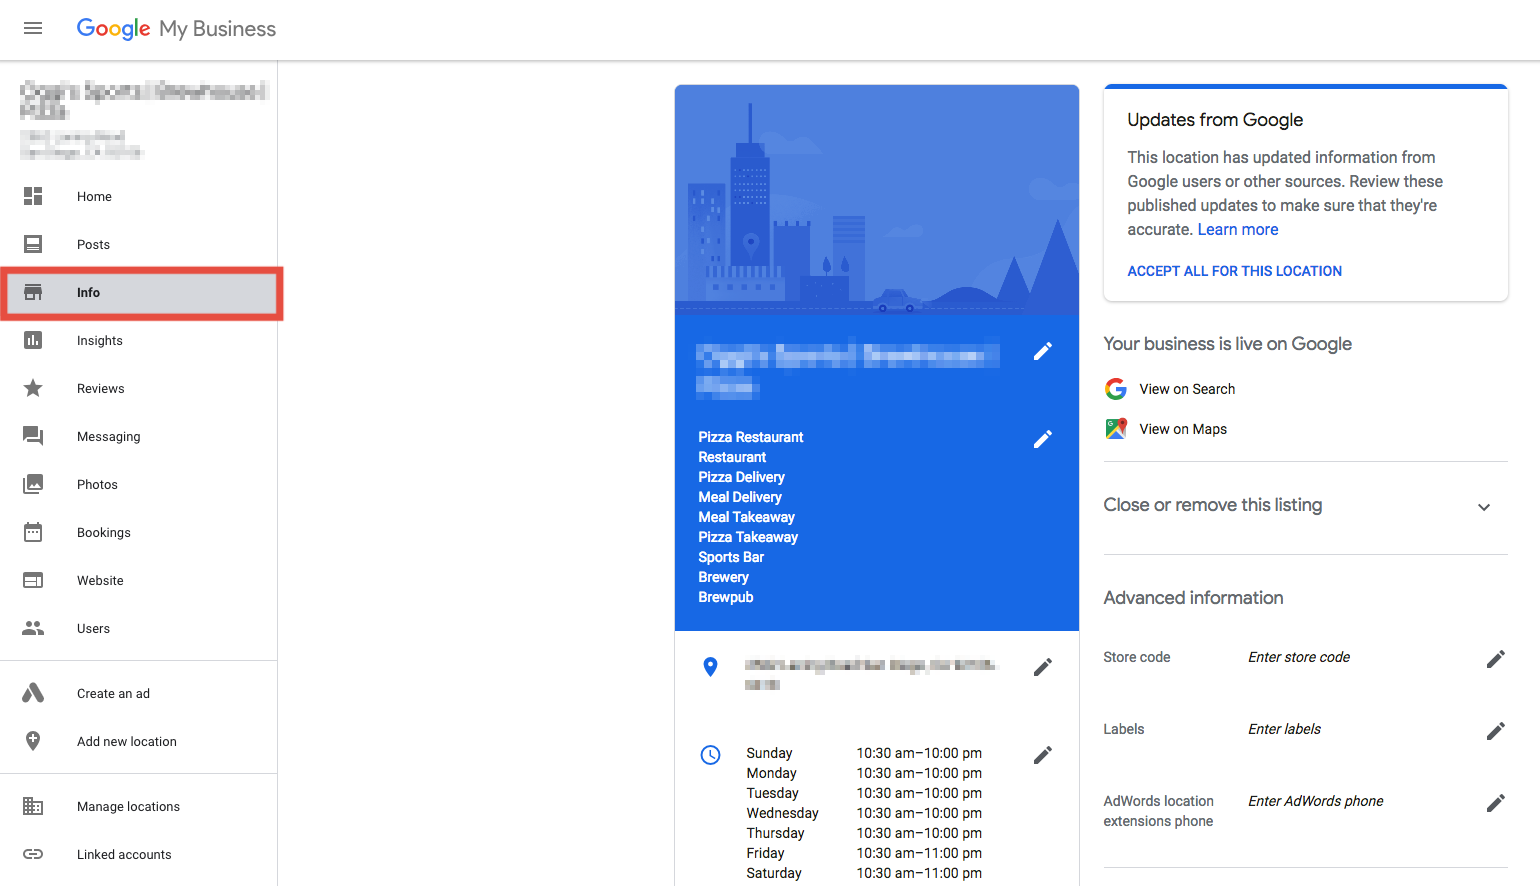 Info section of Google My Business Dashboard